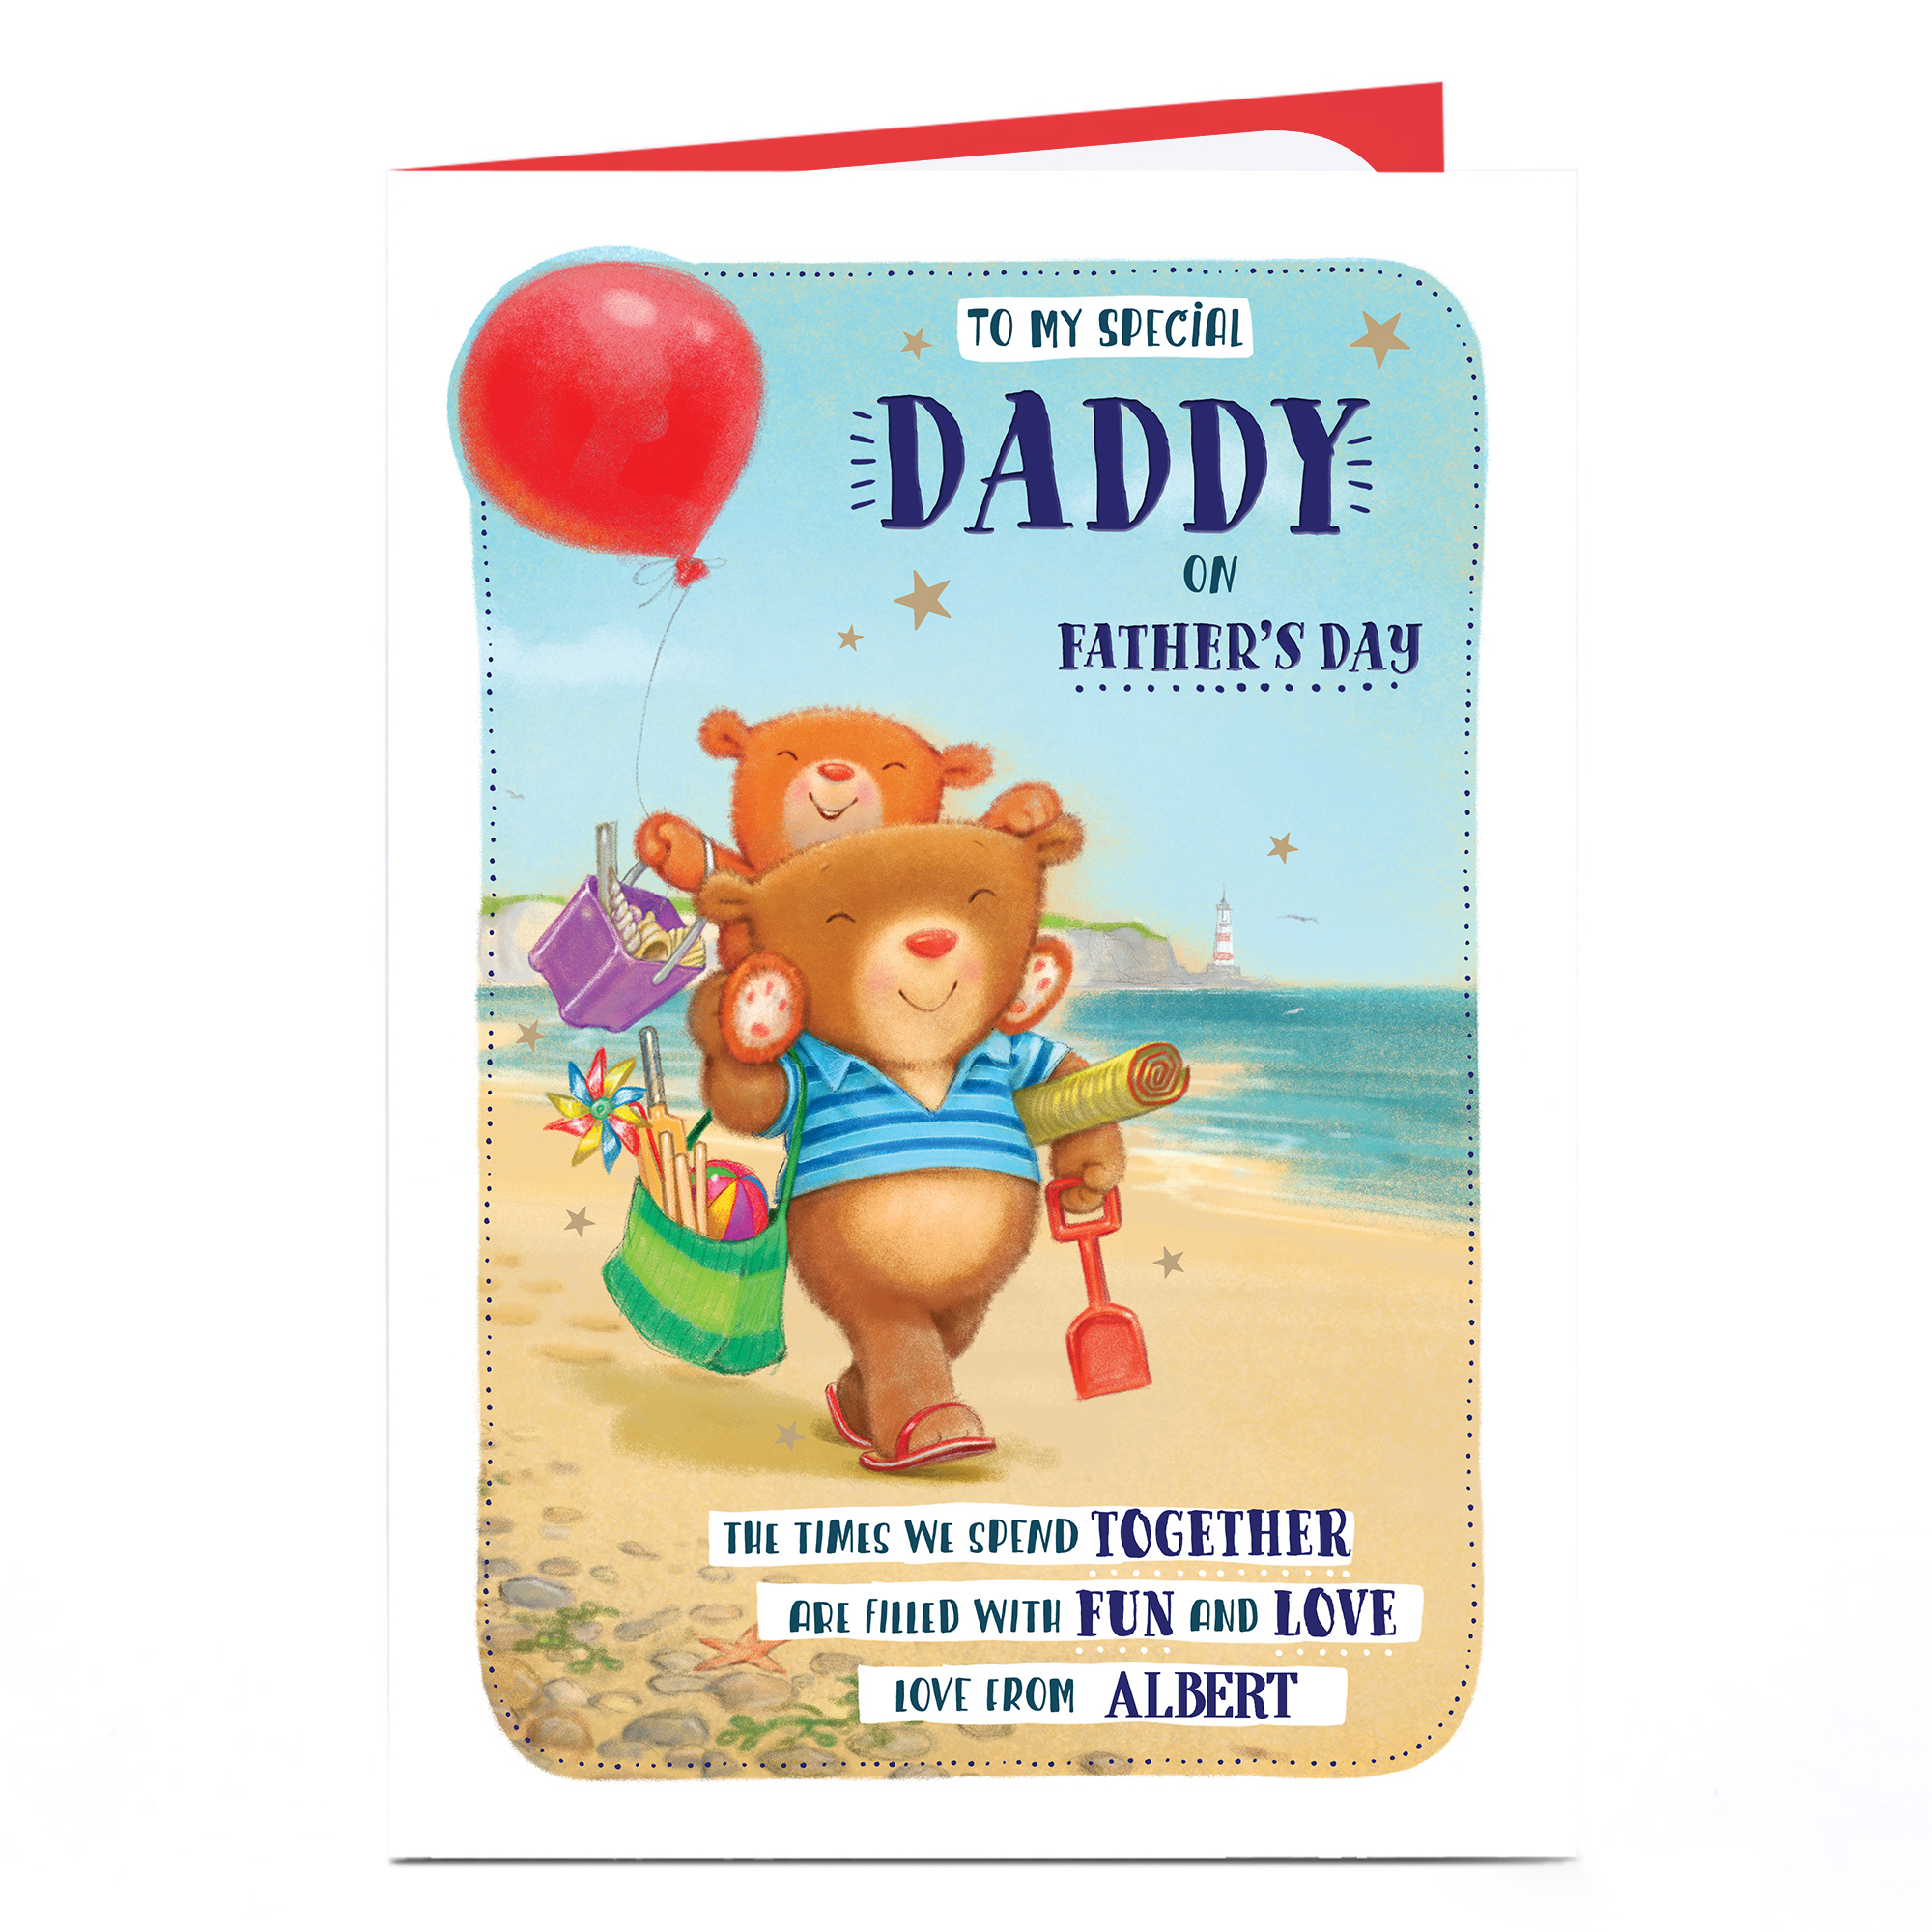 Personalised Father's Day Card - To My Special Daddy